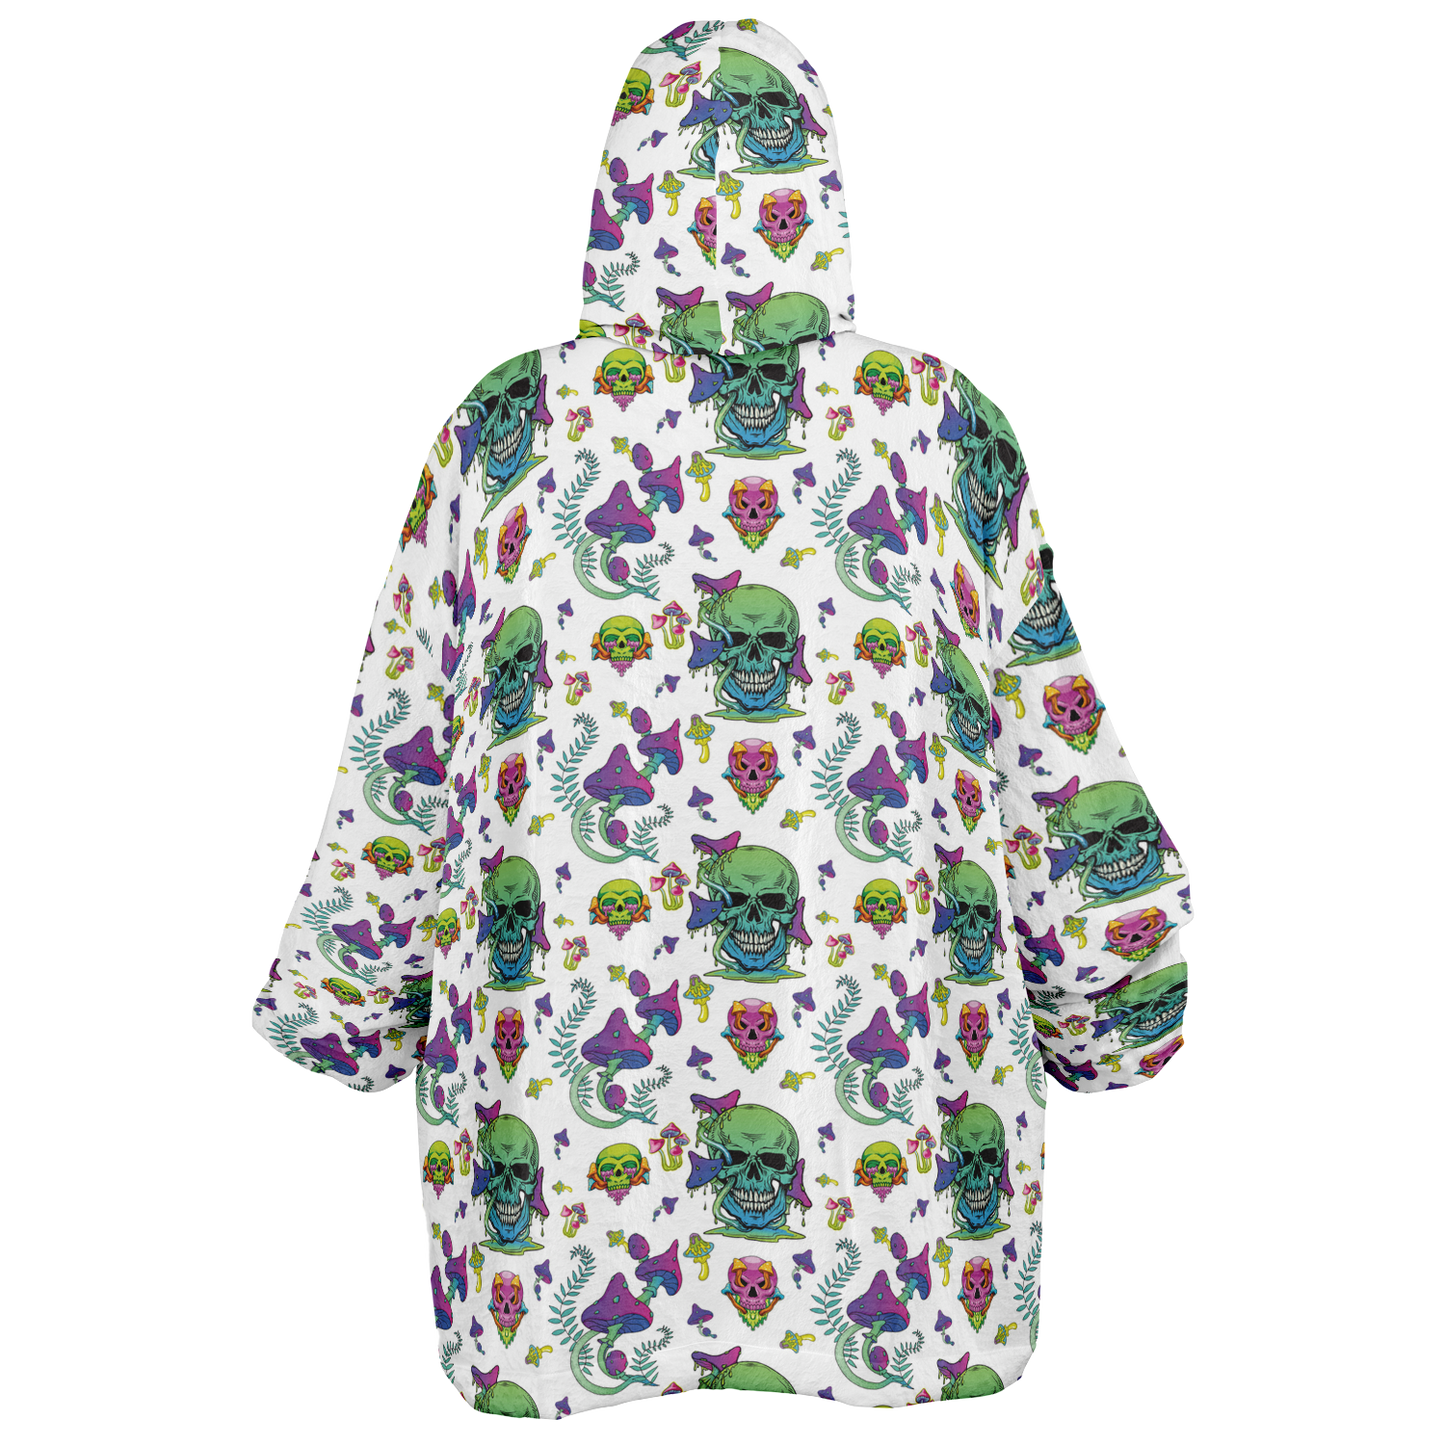 Psychedelic Mushie SuperHoodie White - Limited Edition Buy 2 & Get FREE Shipping